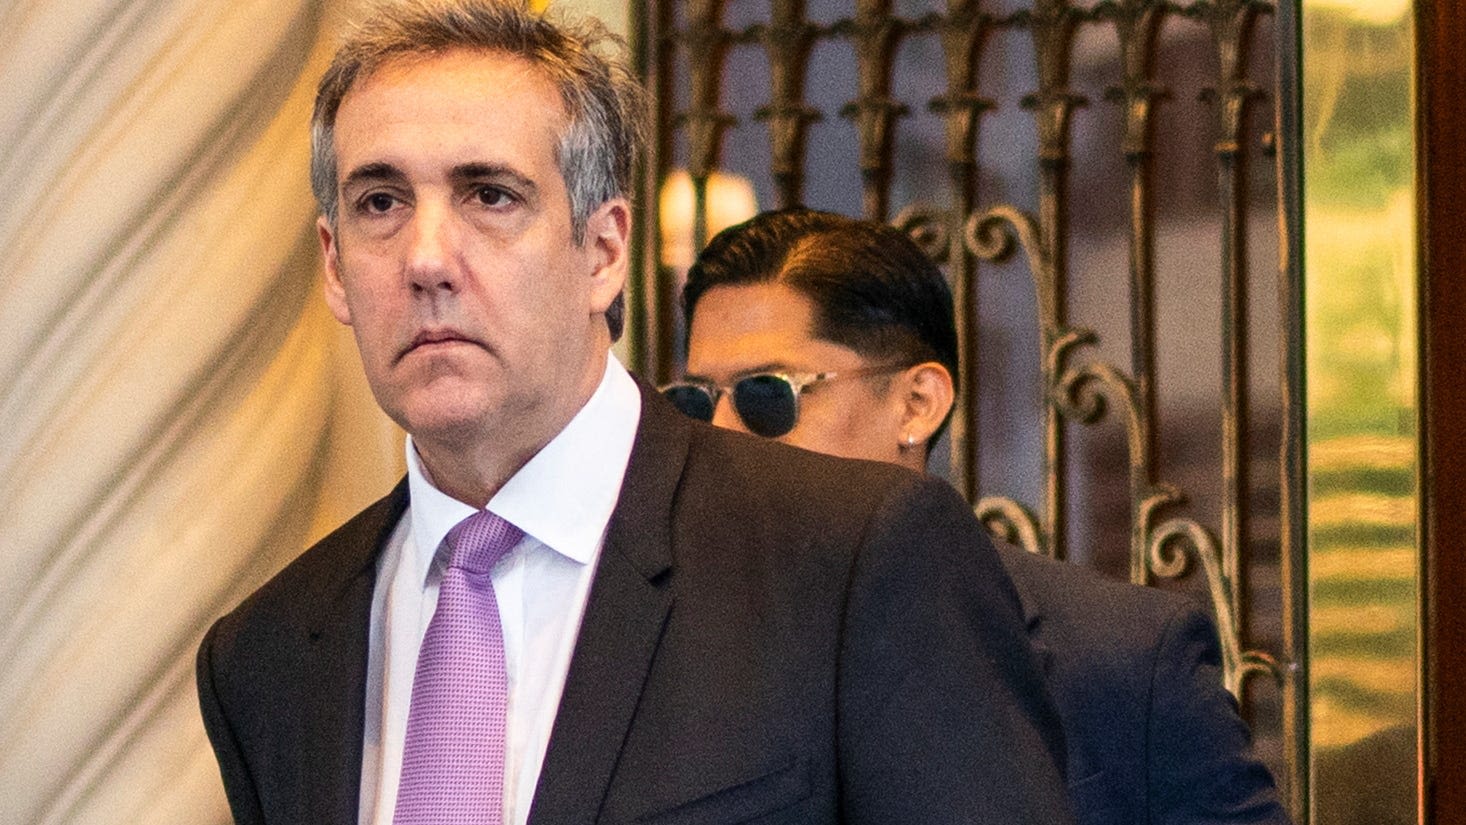 Michael Cohen's testimony in Trump hush money trial impressed experts, but suffered setbacks